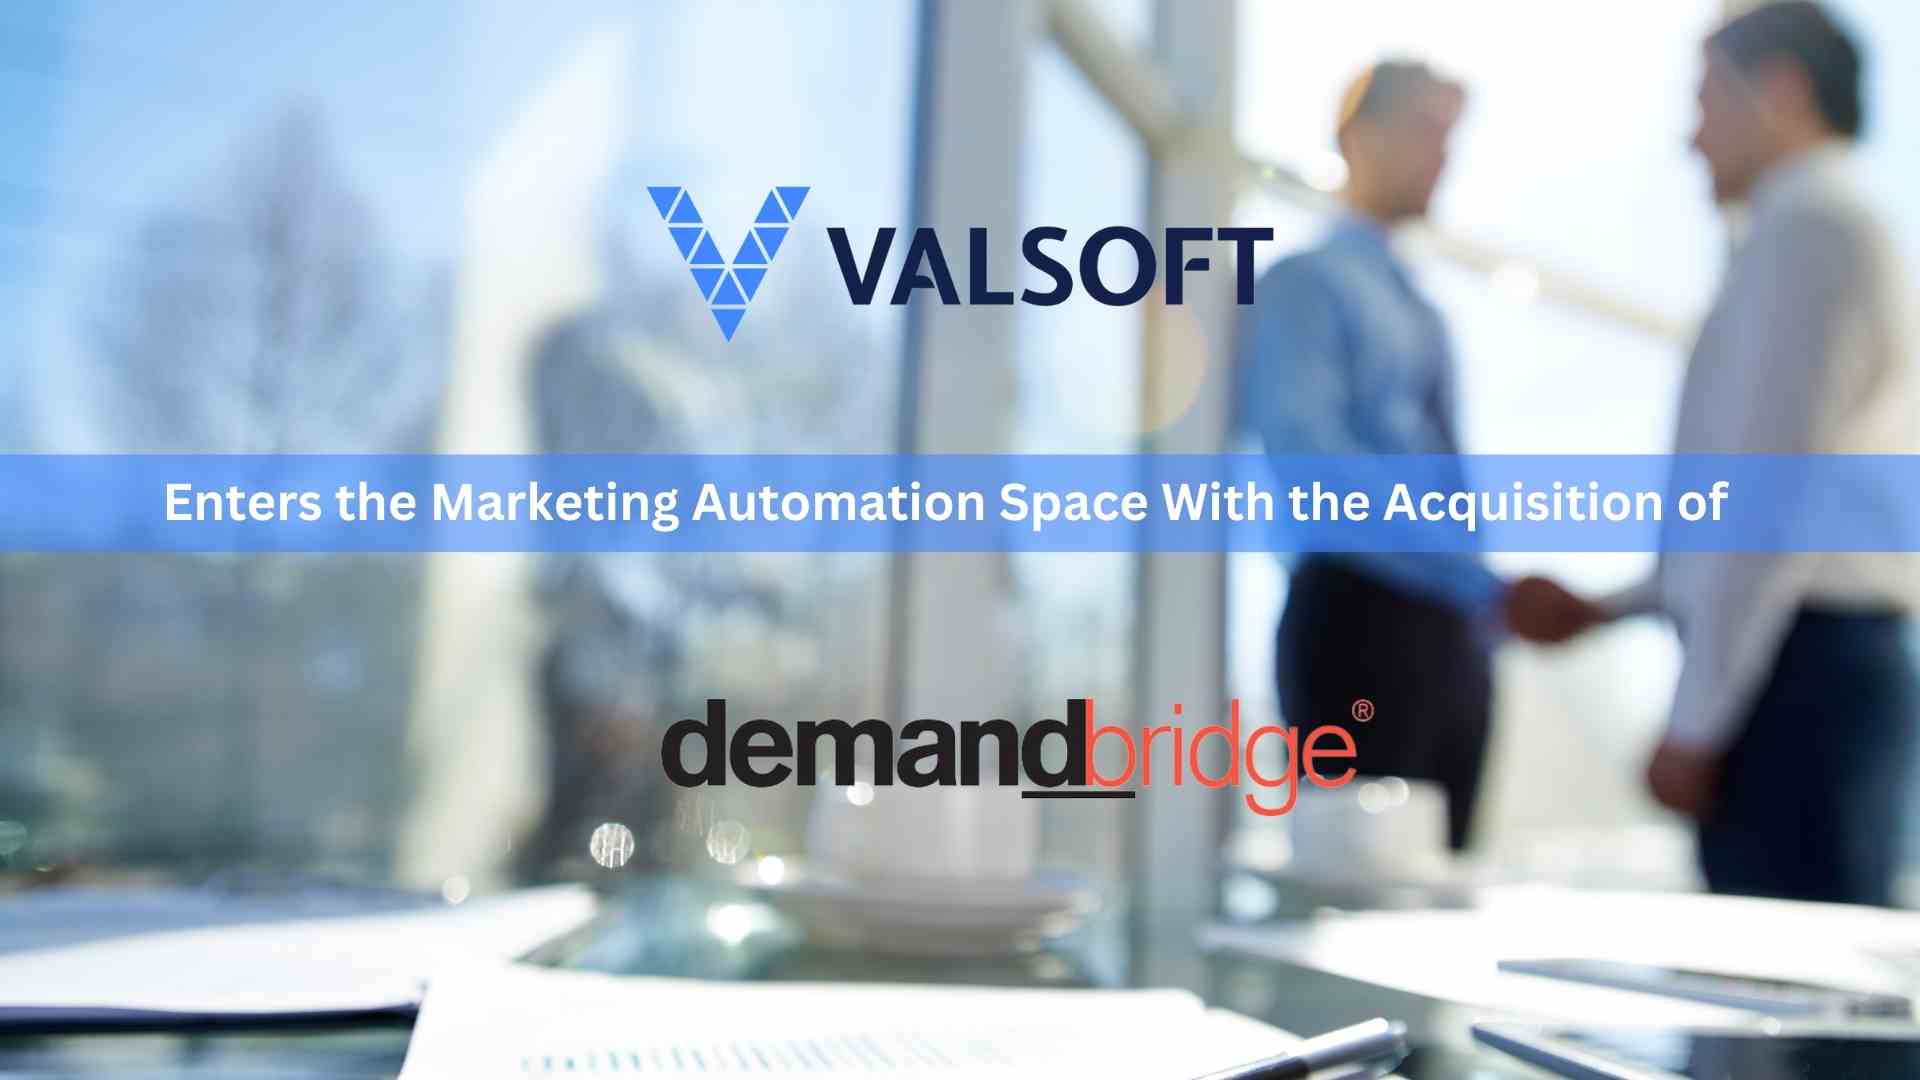 Valsoft Corporation Enters the Marketing Automation Space with the Acquisition of DemandBridge